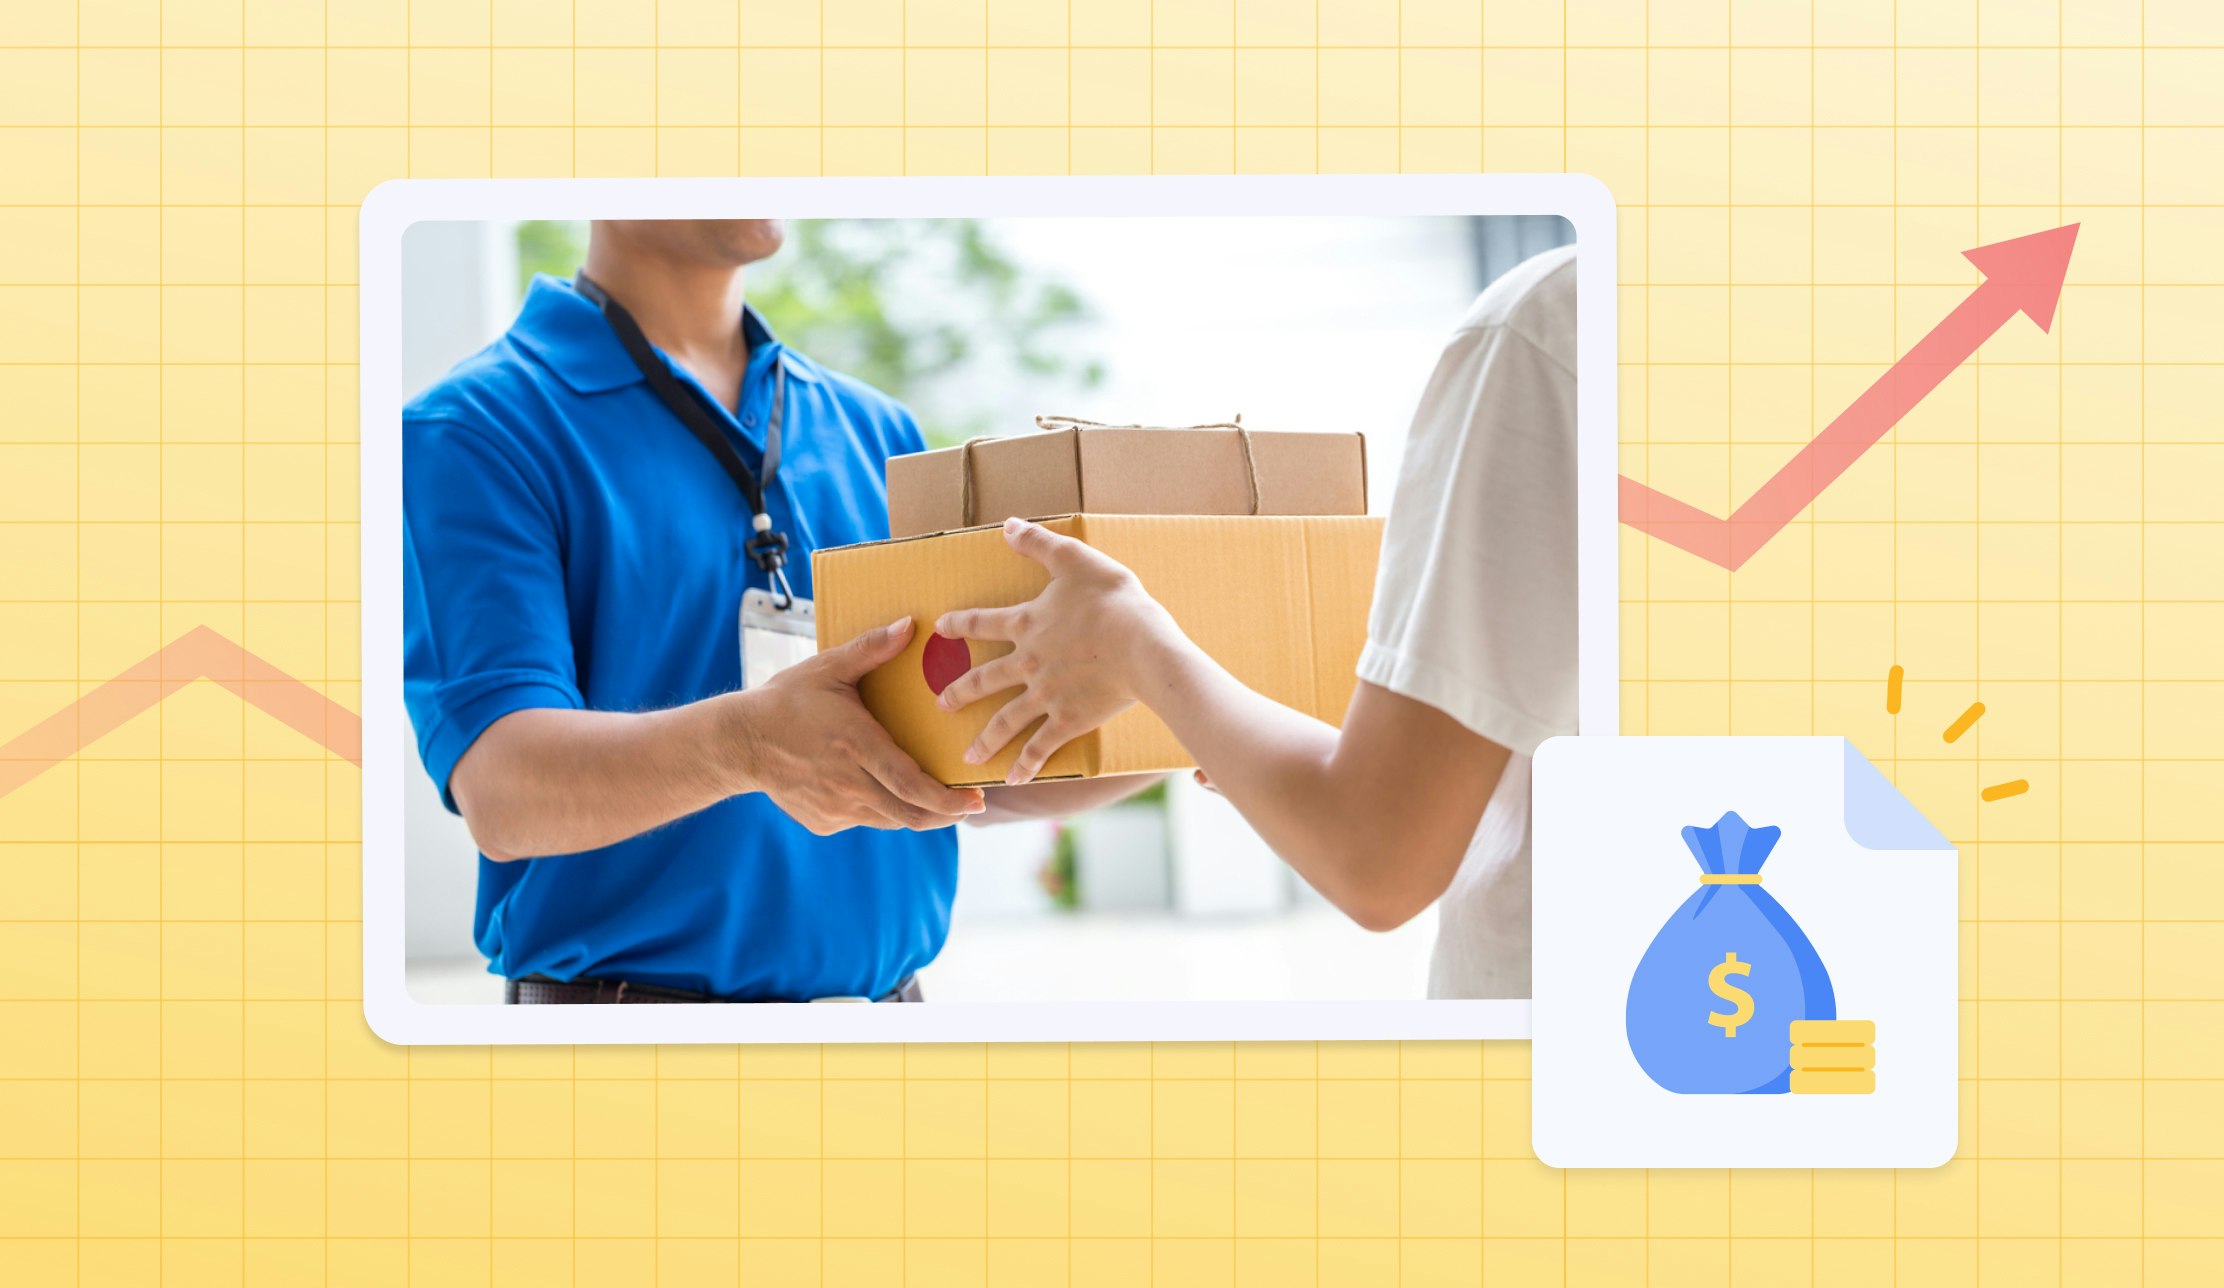 8 Delivery Business Opportunities in 2023 You Should Know About